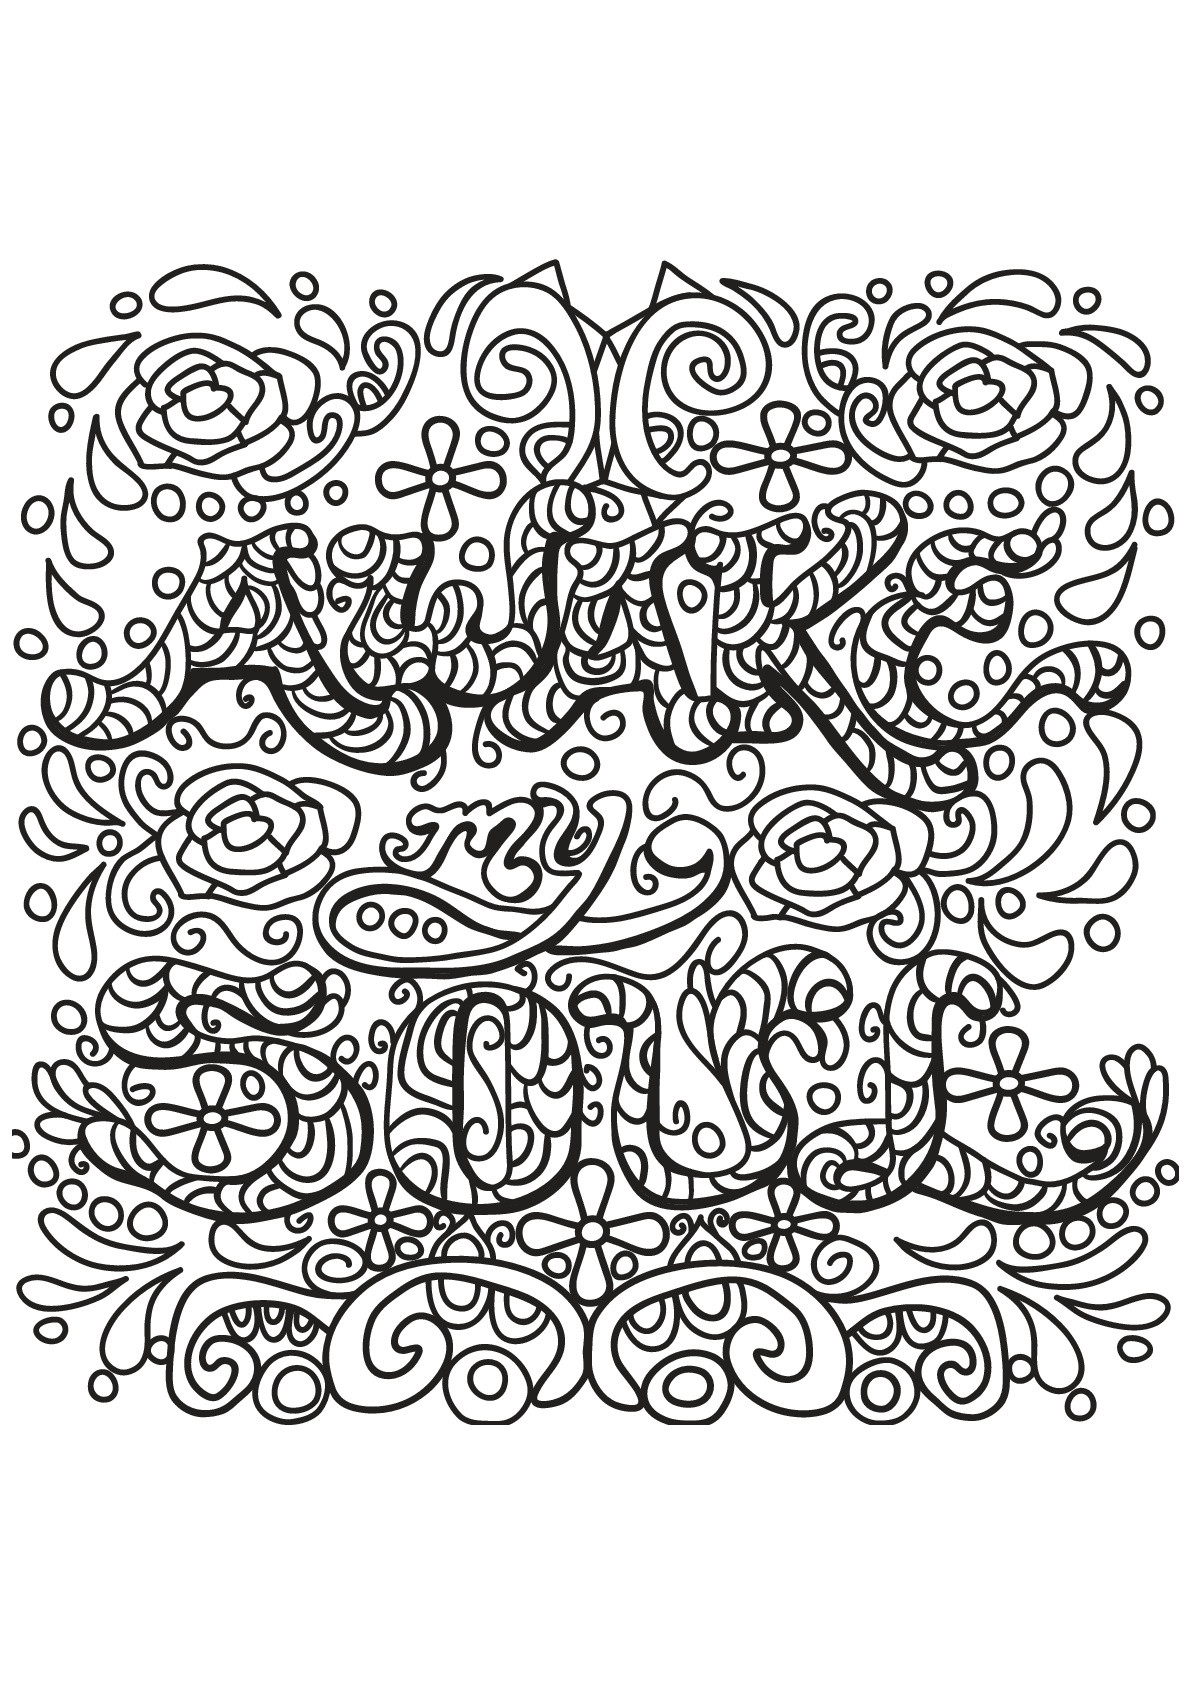 Quote Coloring Pages For Adults
 Free book quote 9 Quotes Adult Coloring Pages